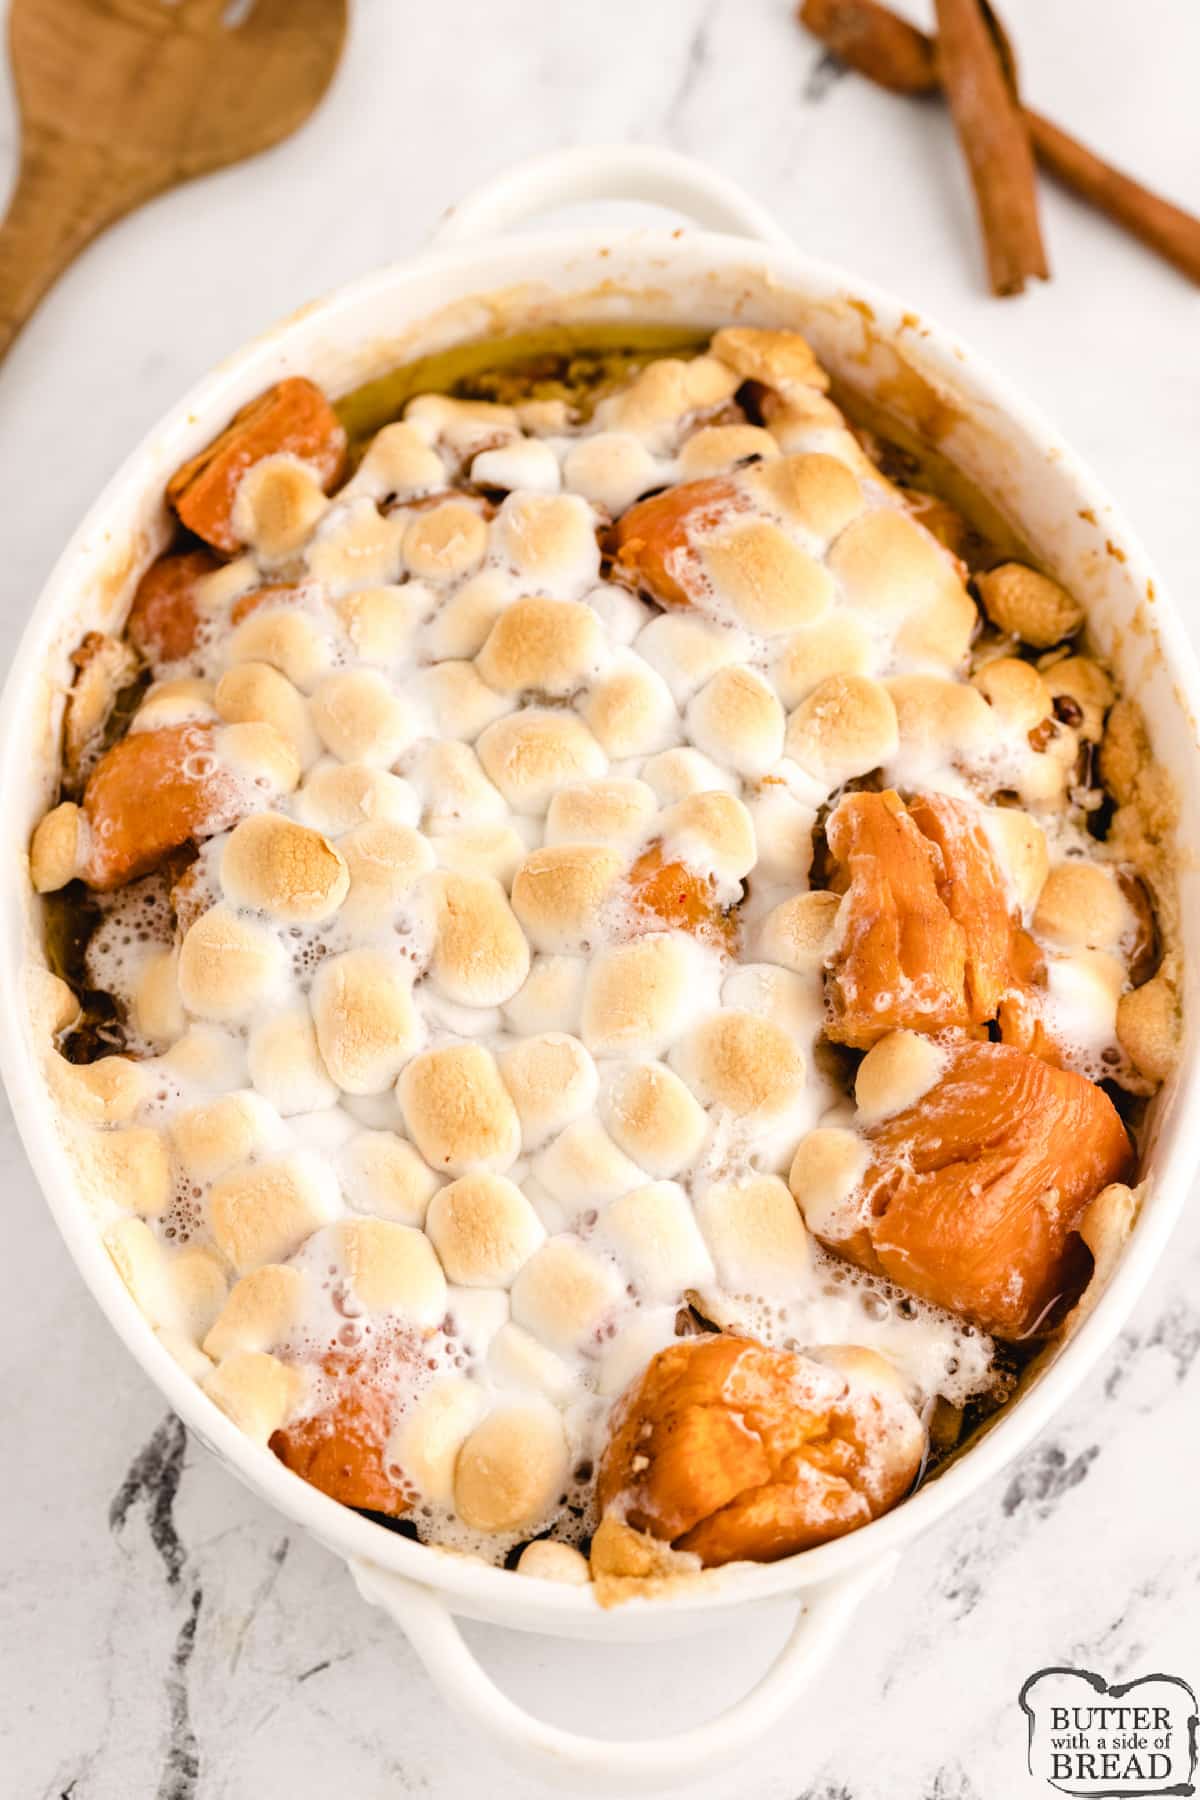 Apple Sweet Potato Casserole with Marshmallows made with sliced apples and canned sweet potatoes along with butter, brown sugar, cinnamon, pecans and marshmallows. Delicious sweet potato recipe that is perfect for Thanksgiving dinner.